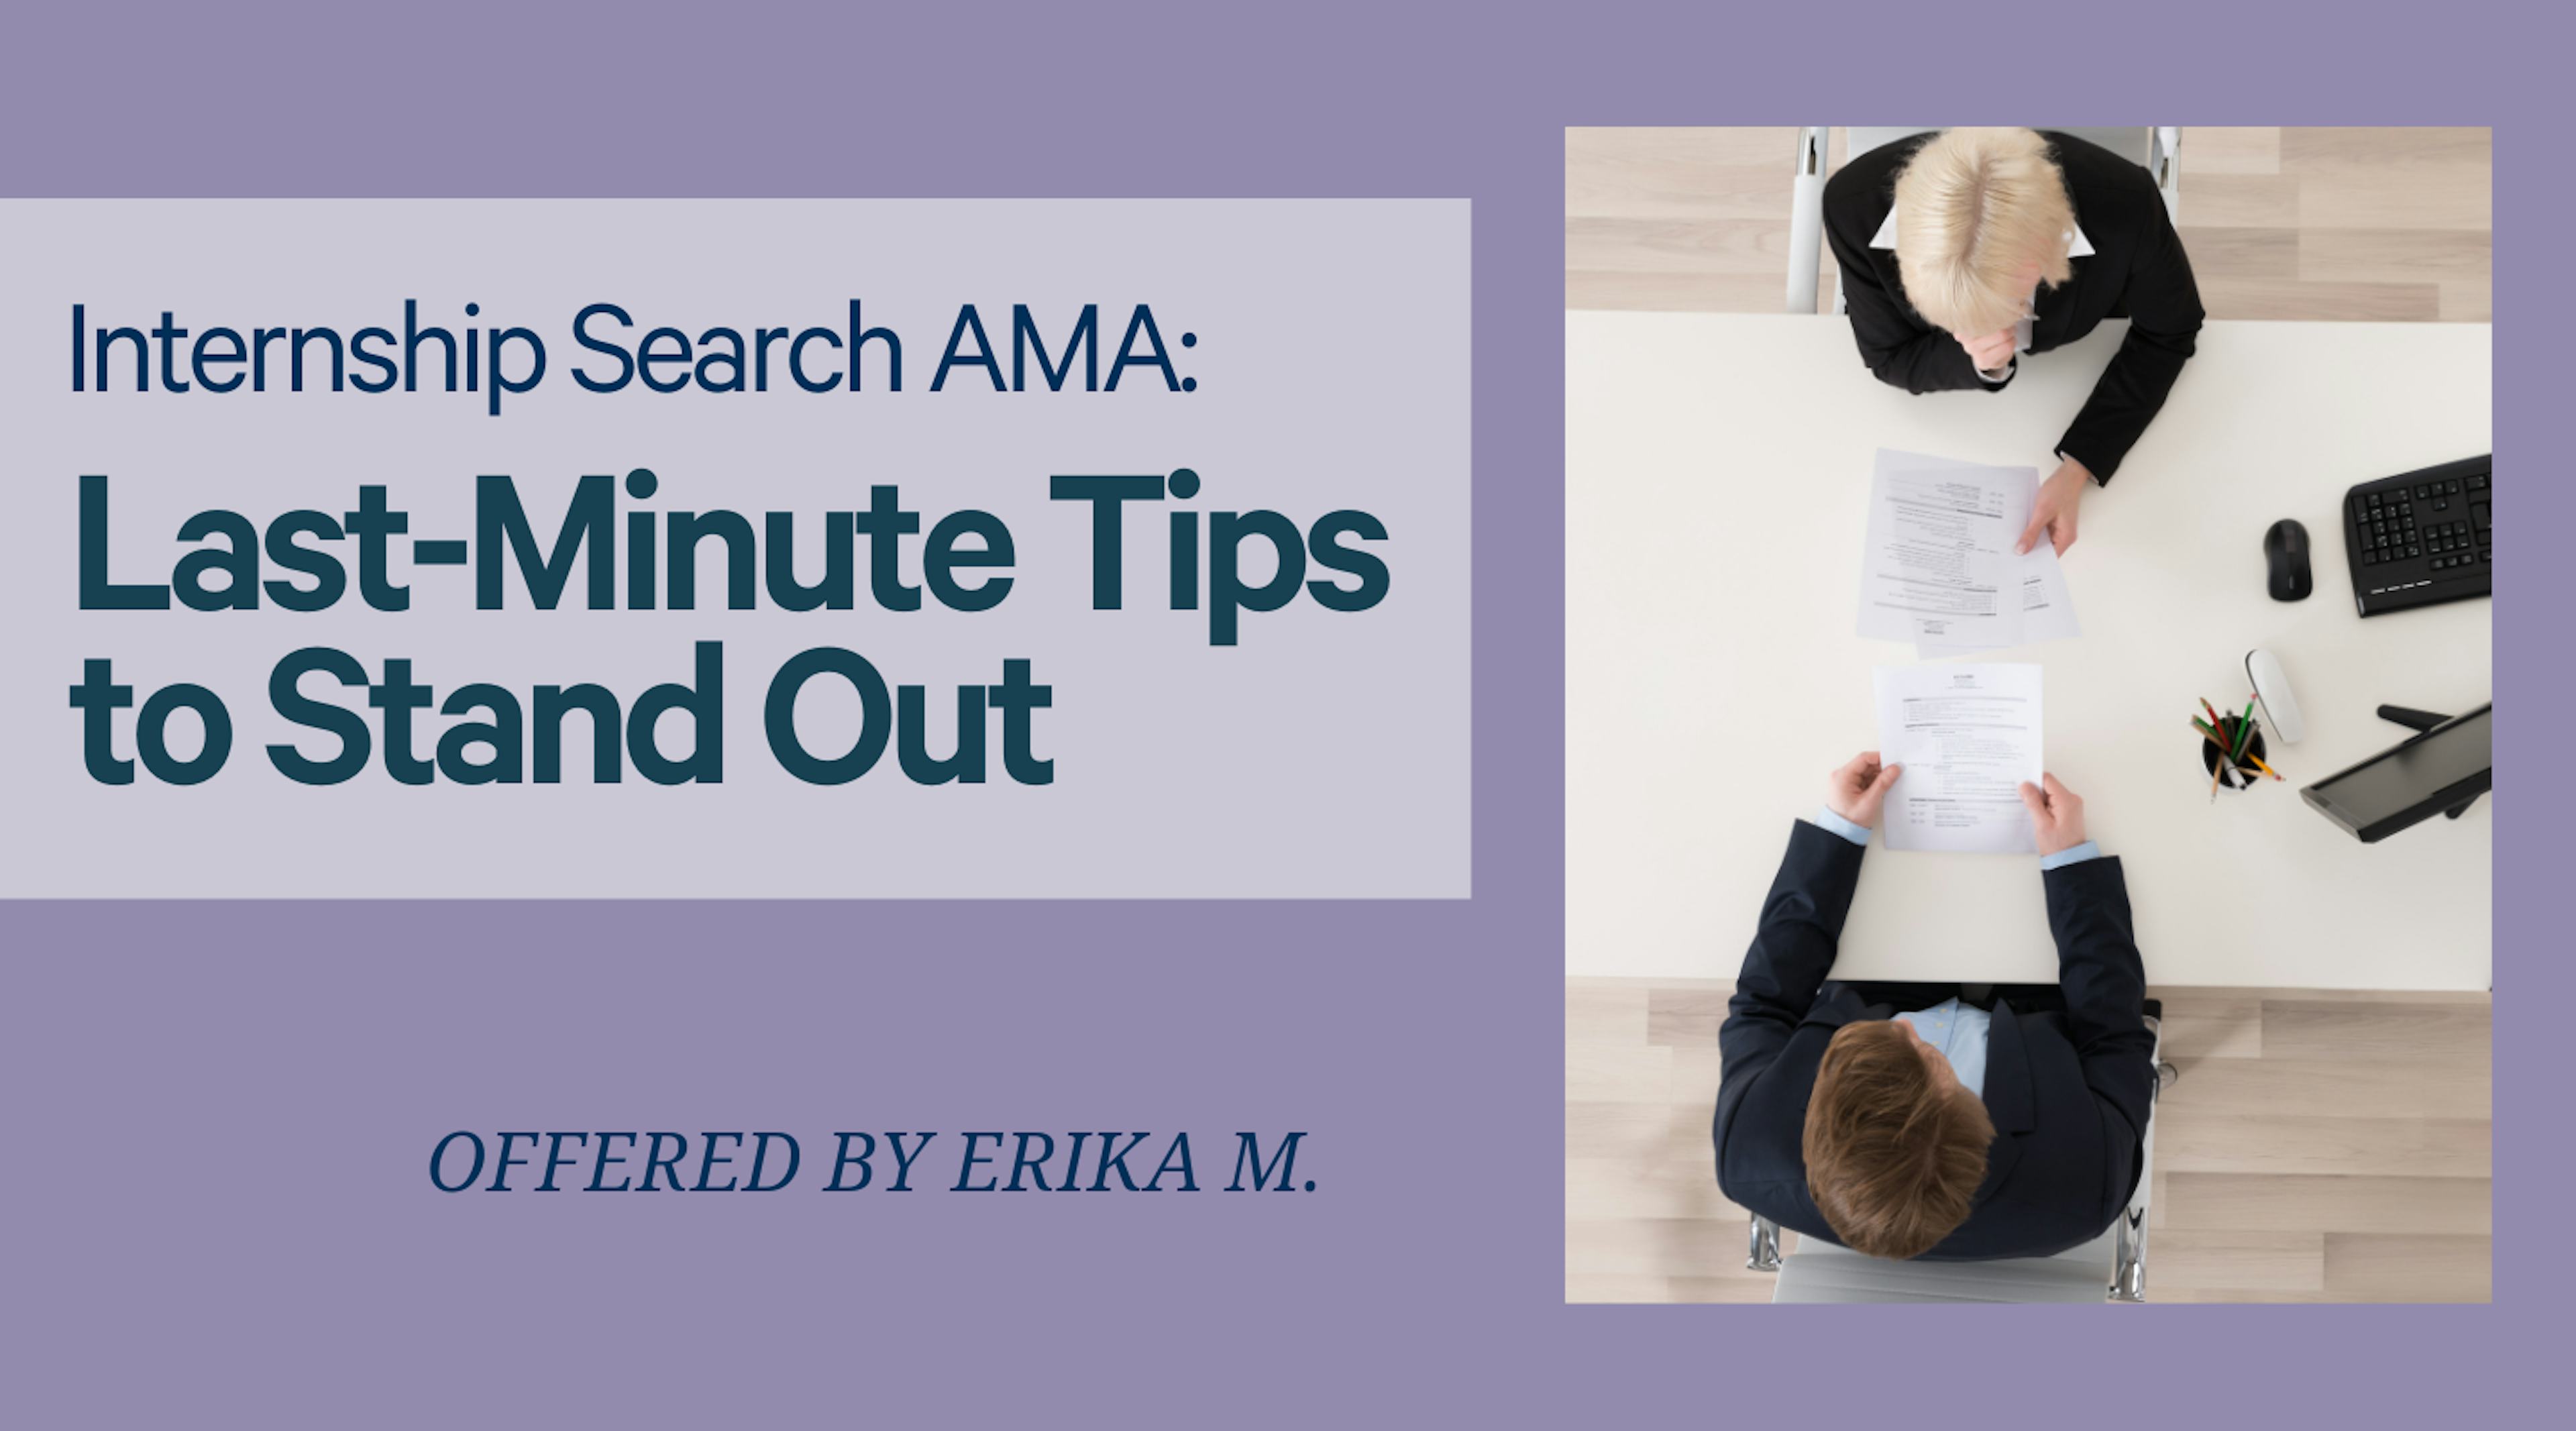 Internship Search AMA: Last-Minute Tips to Stand Out